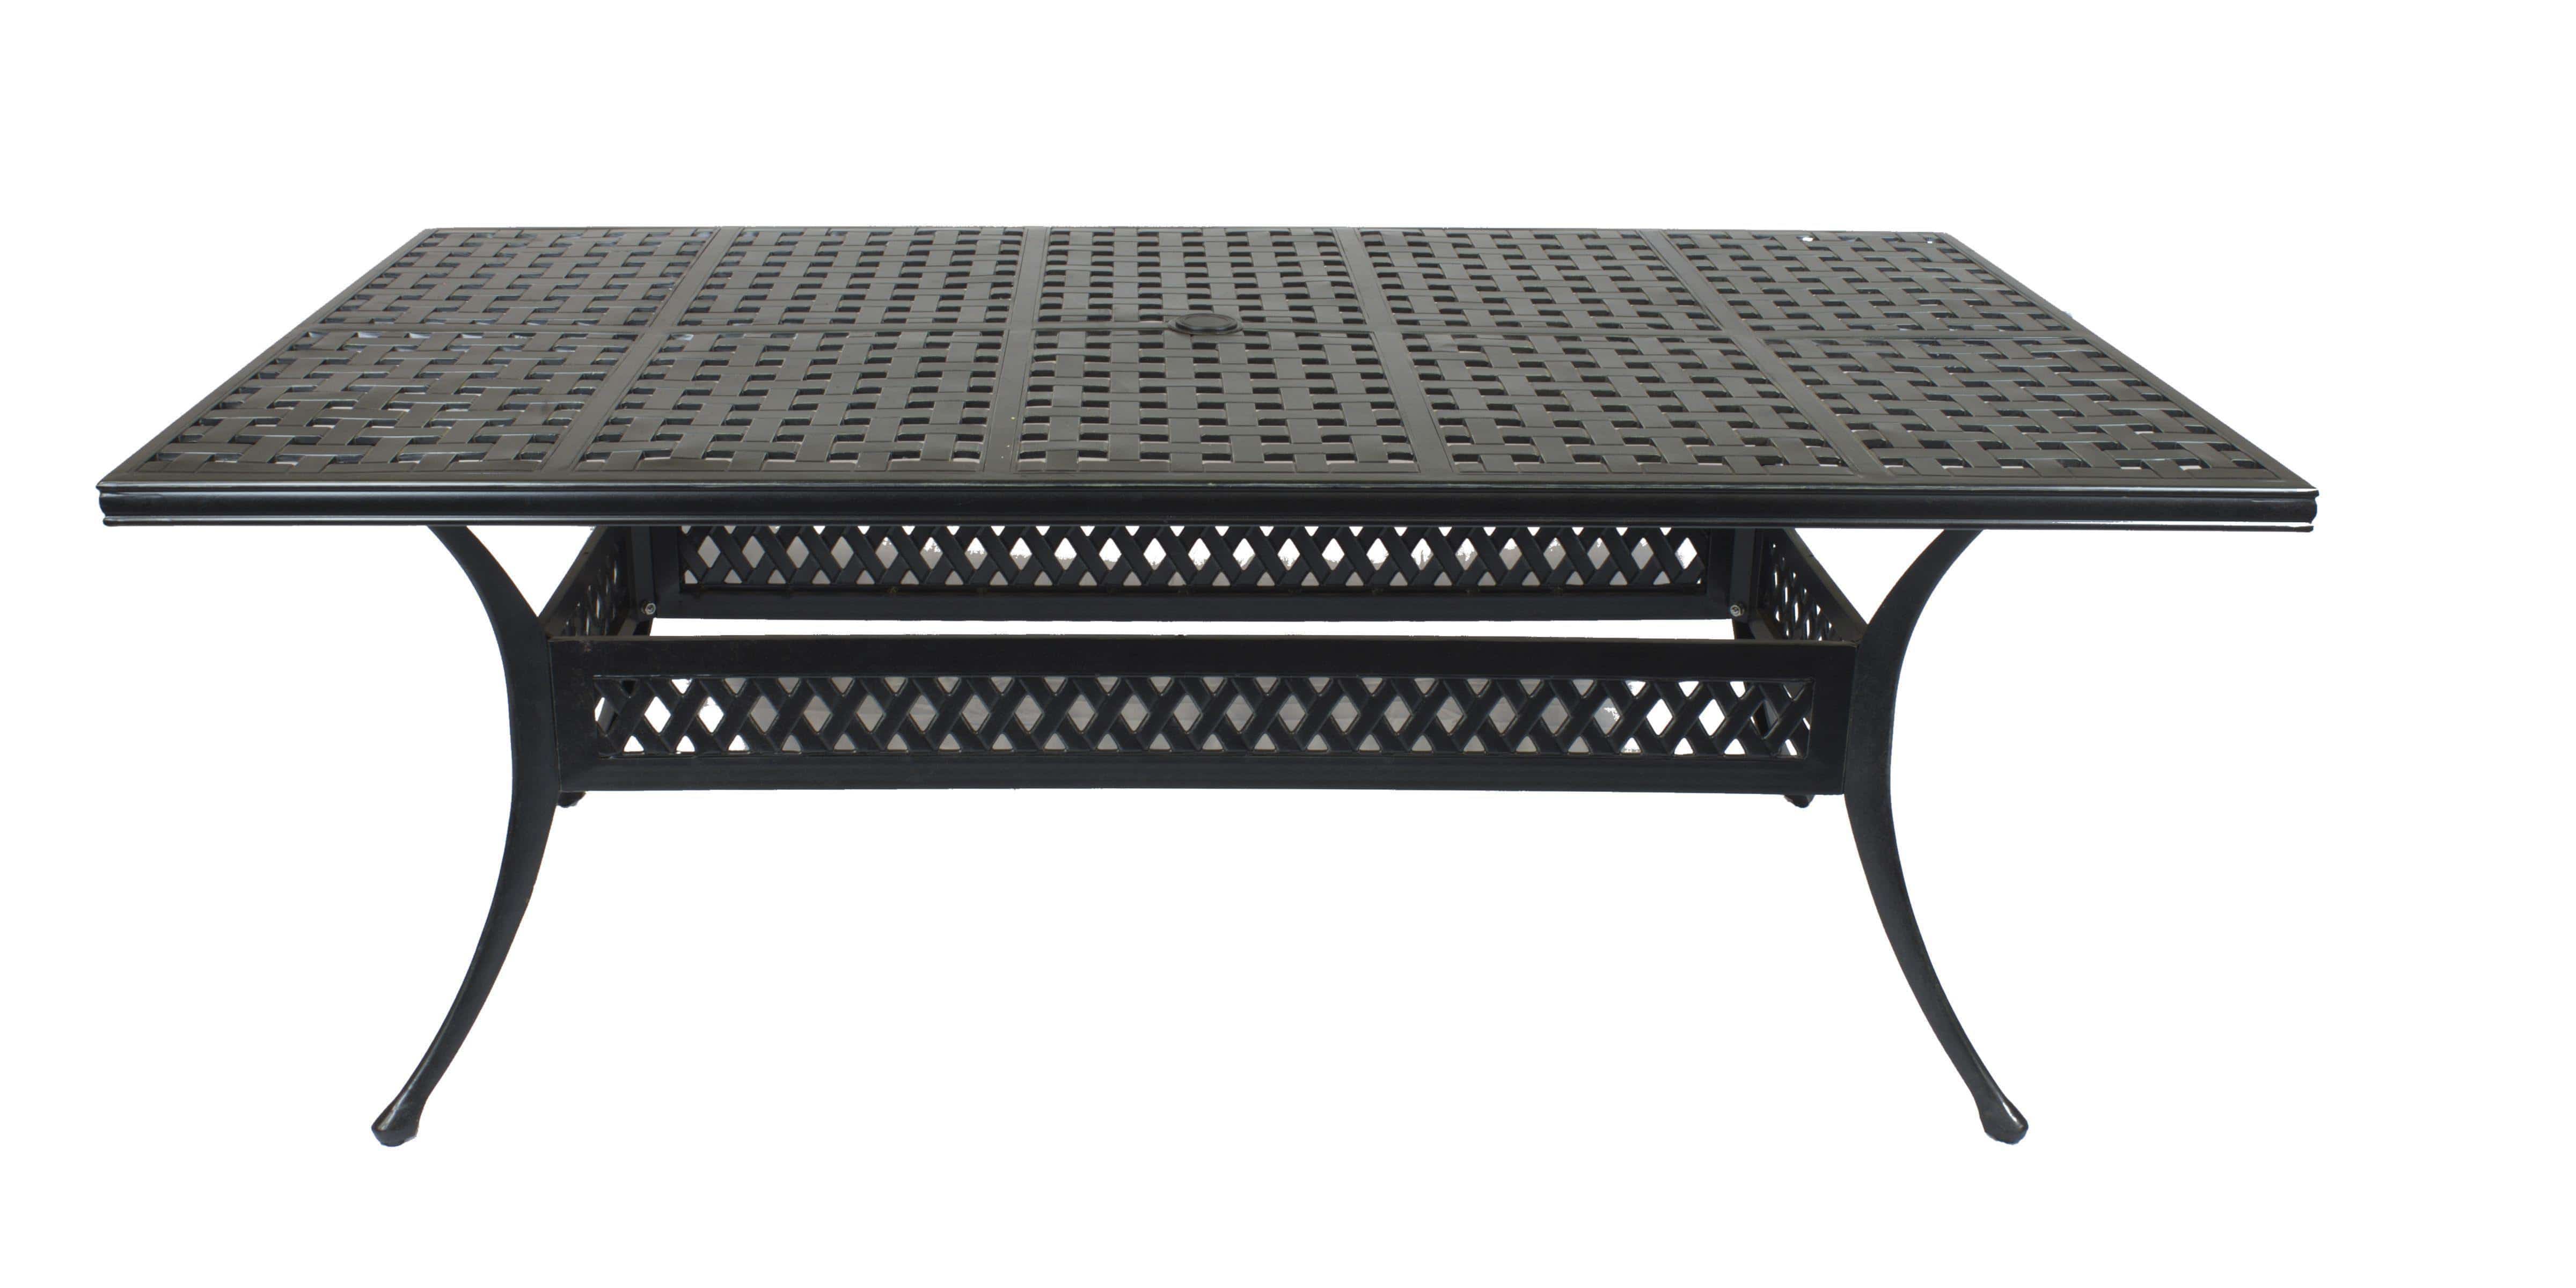 Lawton Casual Comfort Outdoor Dining Table Lawton Casual Comfort - 120" X 46" Rectangle Dining Table Weave